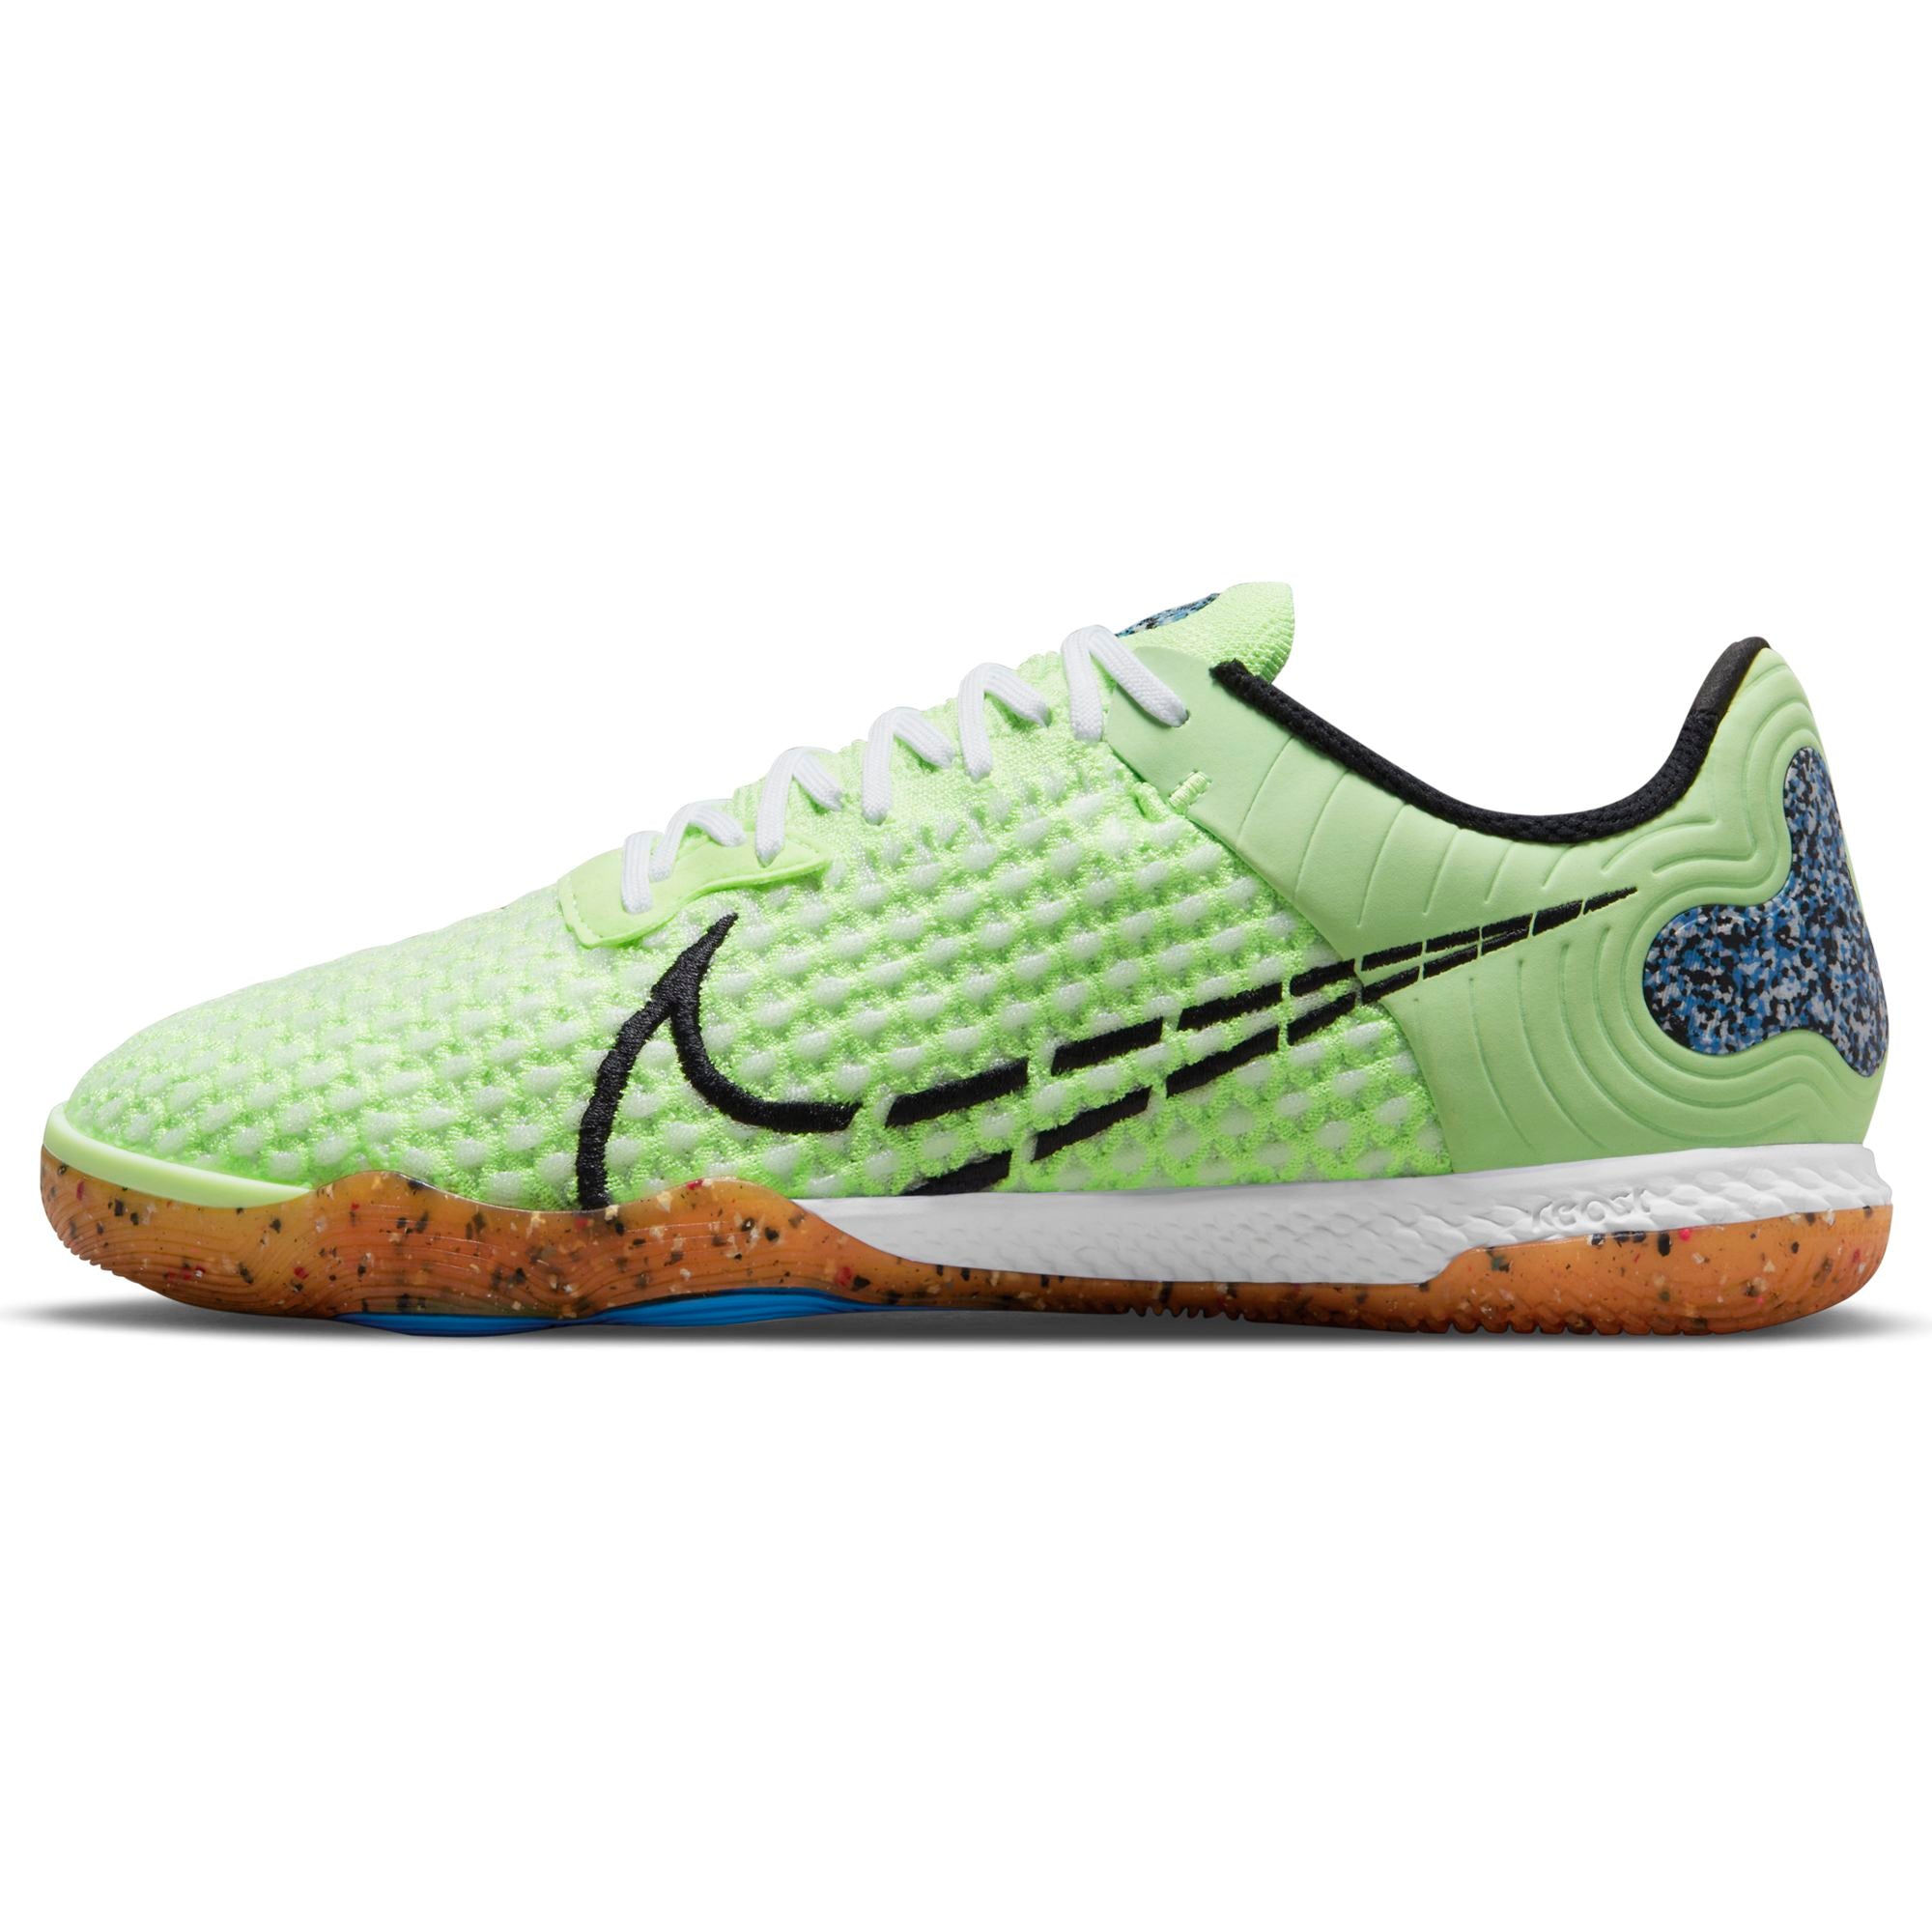 Relajante capitán ambiente Nike React Gato Indoor/Court Soccer Shoes